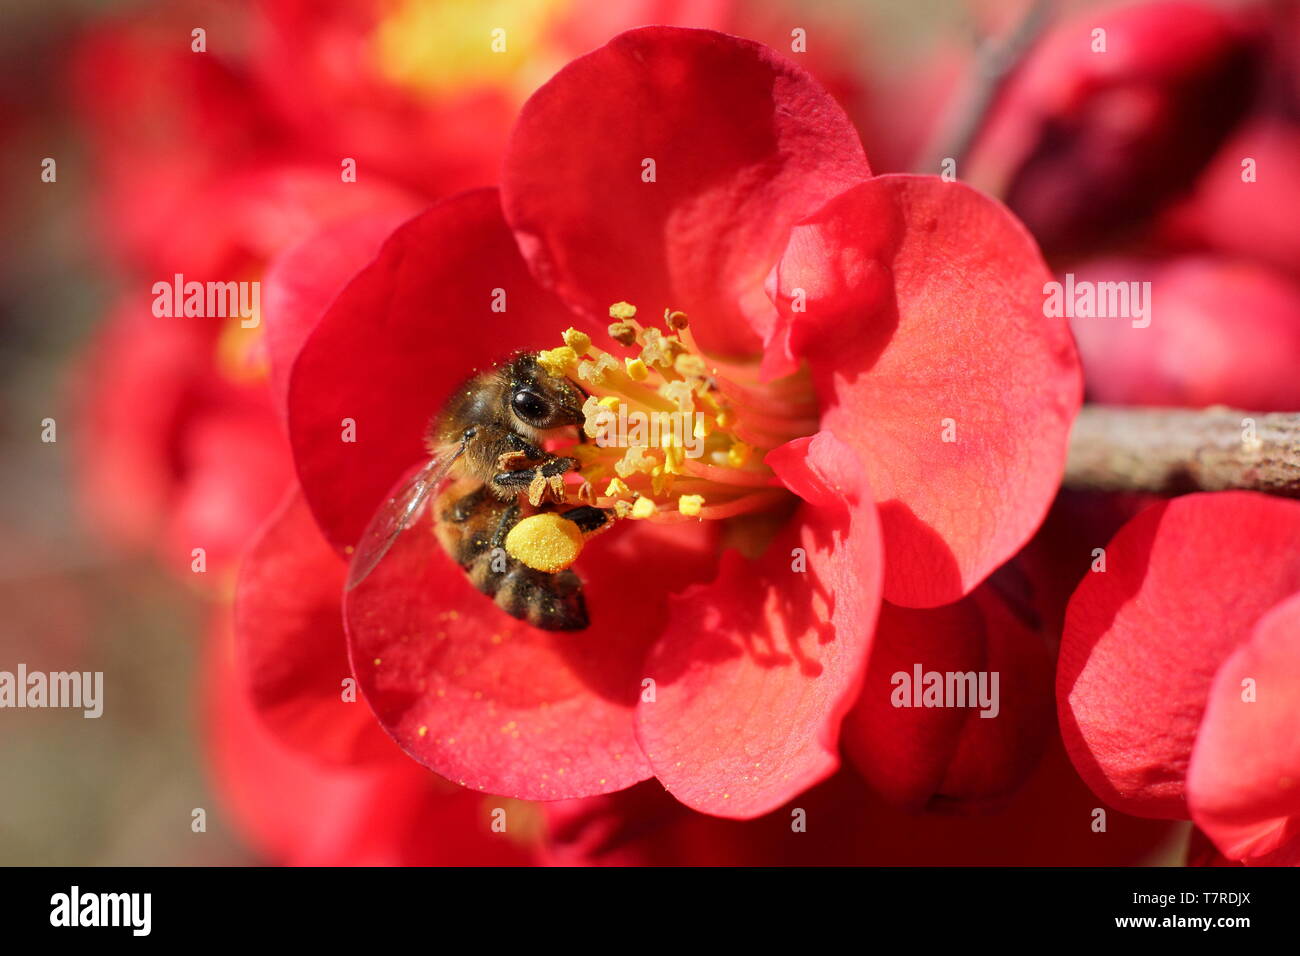 Honey bee on Japanese quince. Apis mellifera on Chaenomeles x superba 'Crimson and Gold'  blossoms - spring. UK. AGM Stock Photo